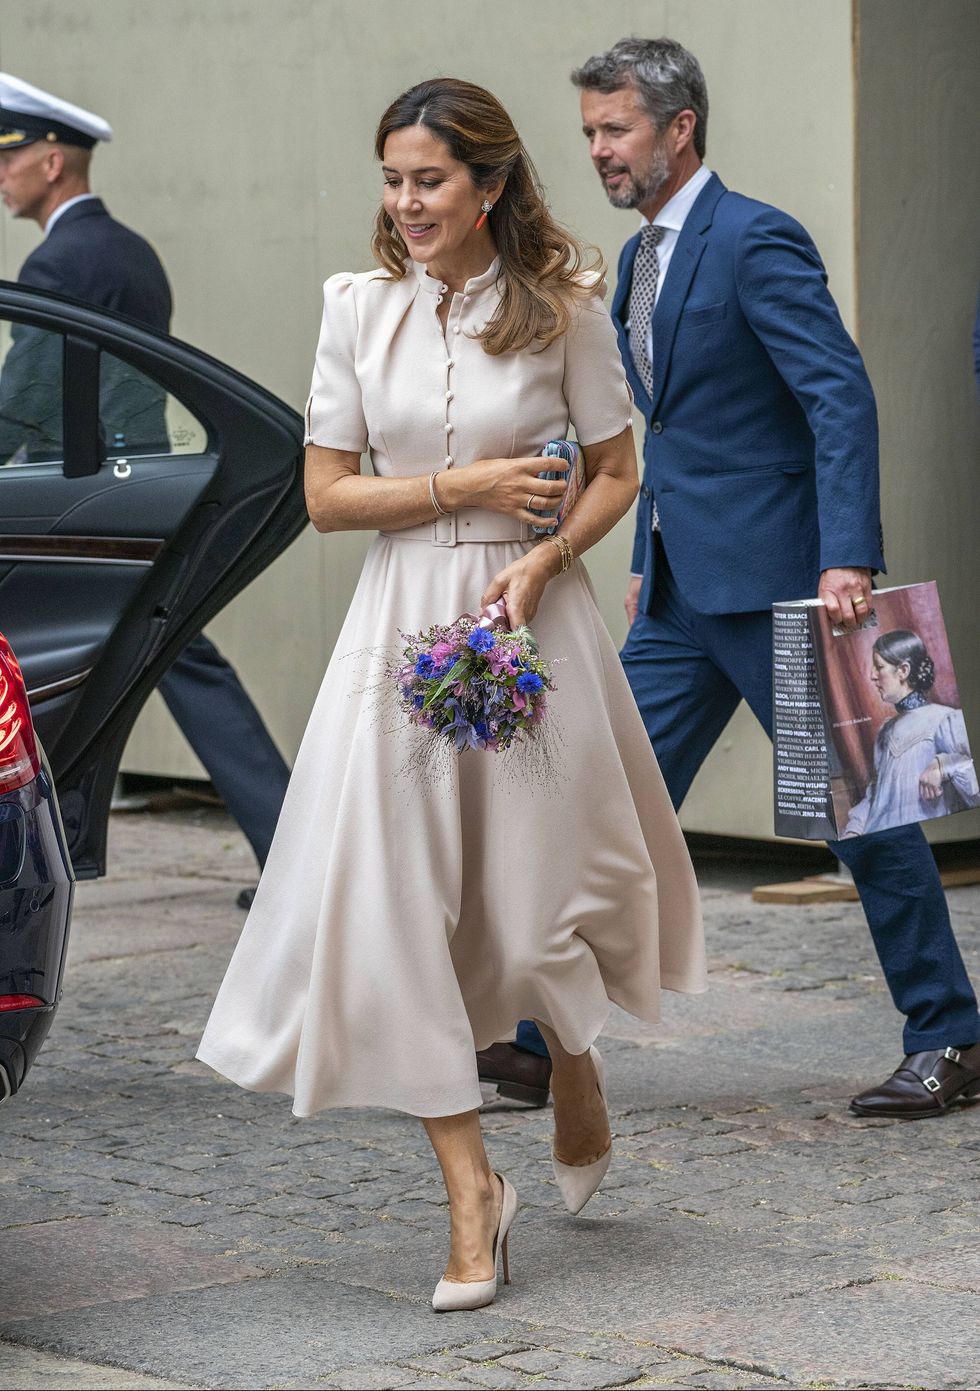 queen margrethe, crown prince frederik and crown princess mary attend the exhibition “the faces of the queen” at frederiksborg castle museum of national history hilleroed, june 16, 2020 photo kaspar wenstrup aller foto video 16 jun 2020 pictured crown princess mary, crown prince frederik photo credit kaspar wenstrupallermega themegaagencycom 1 888 505 6342